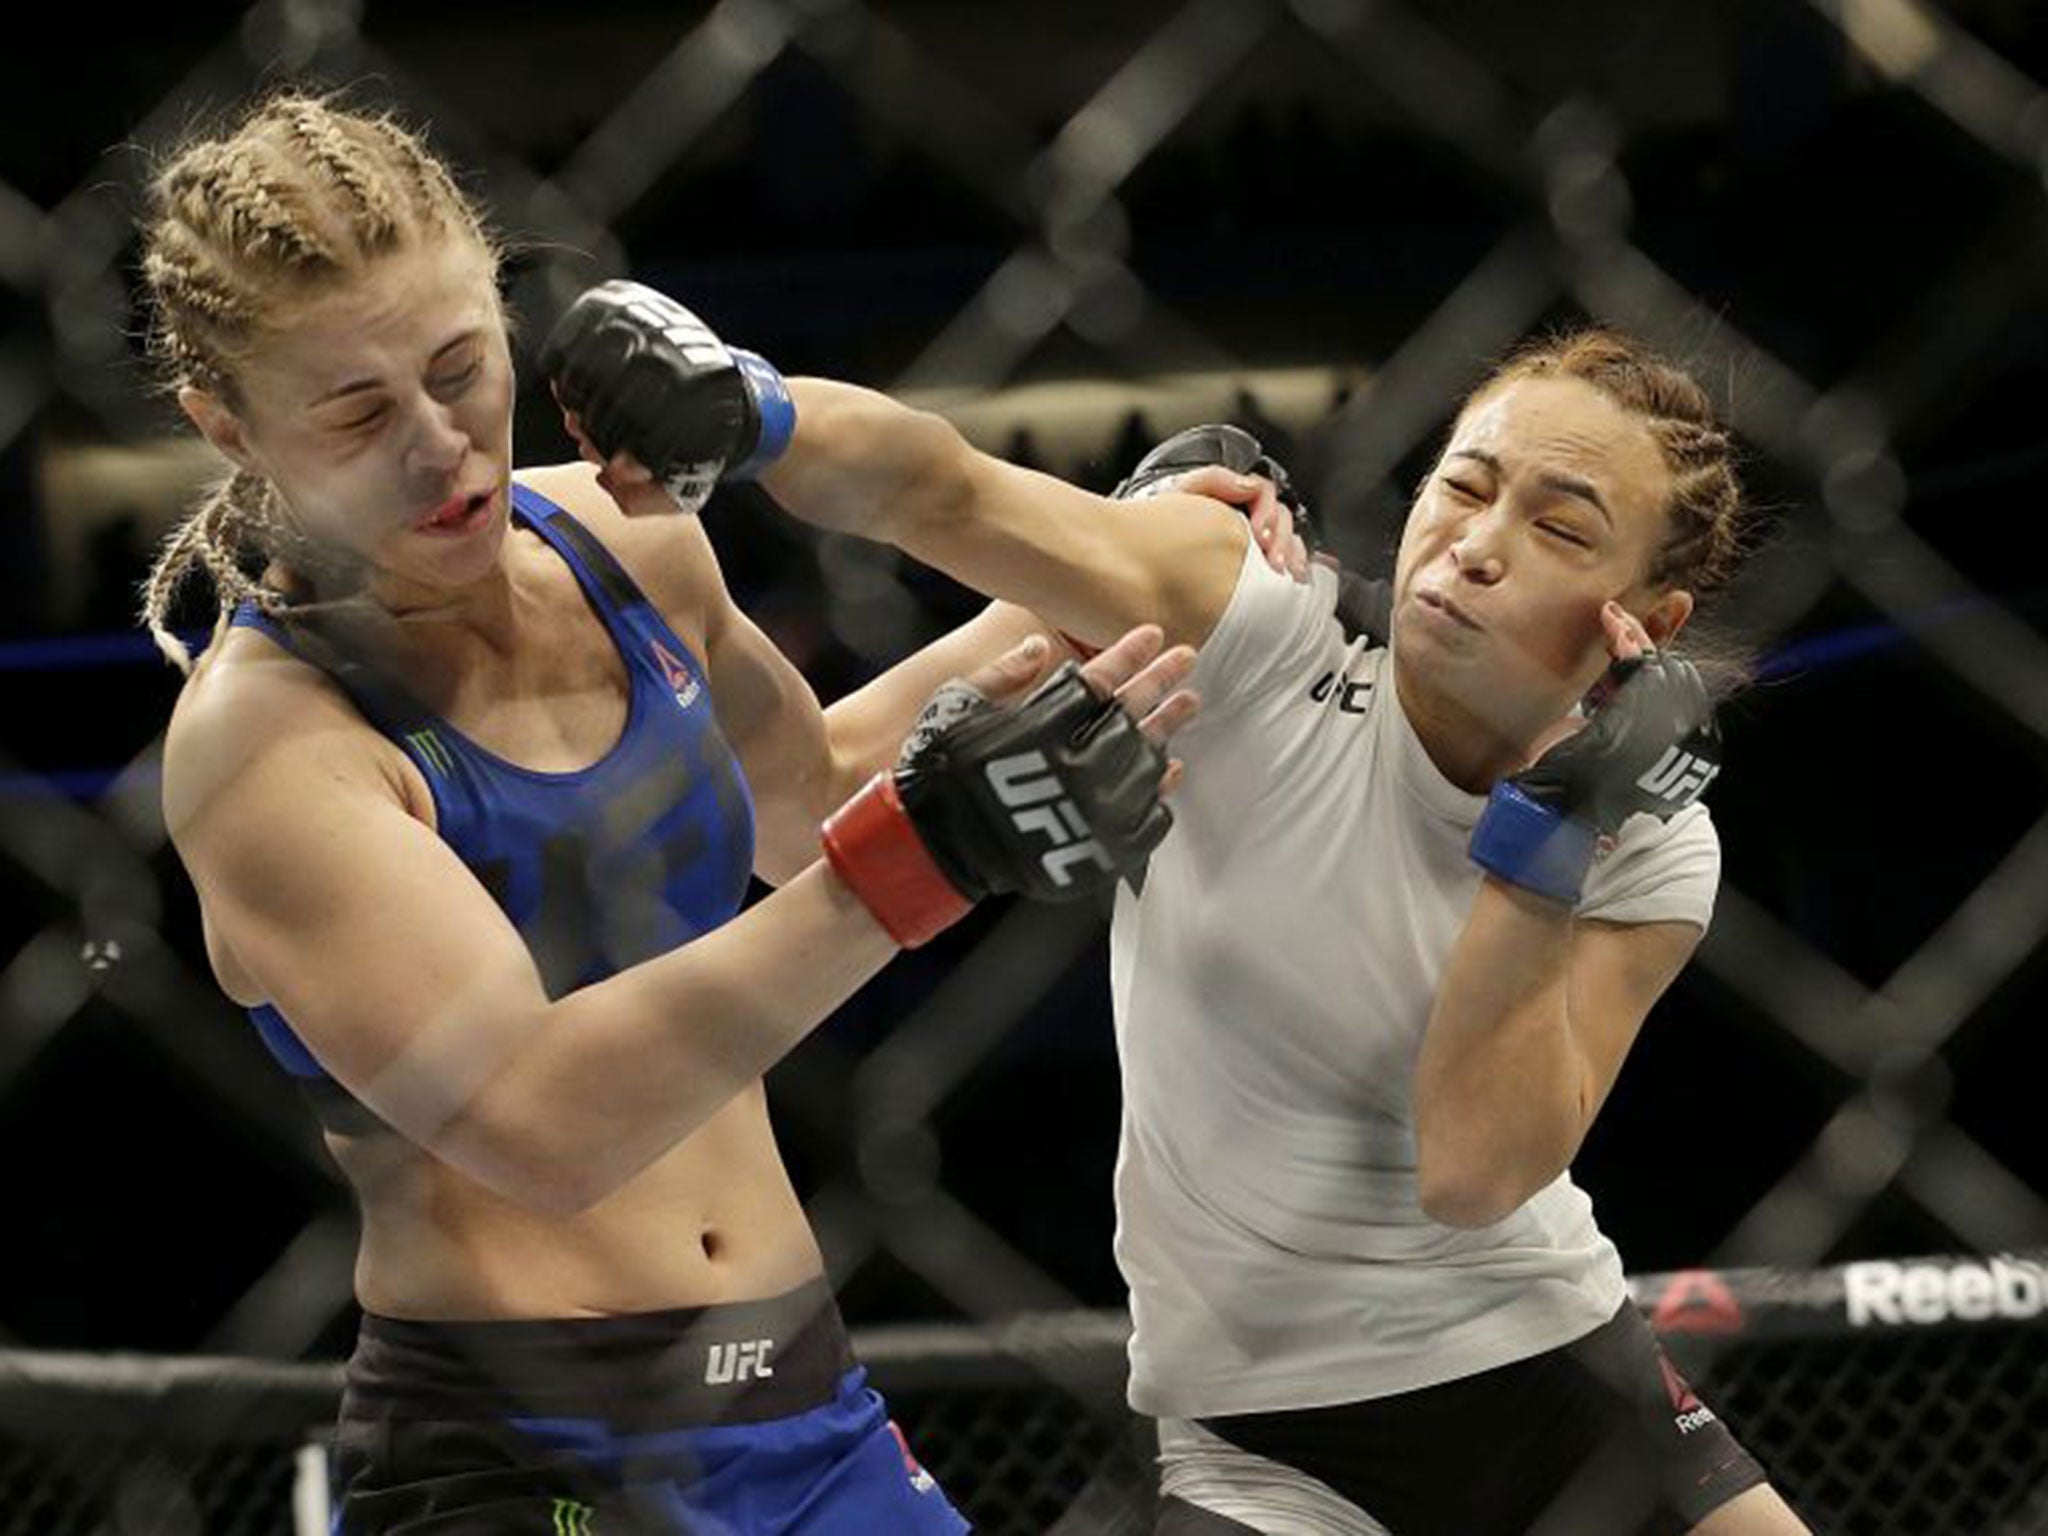 Waterson dominated VanZant from the start and finished the fight in the first round